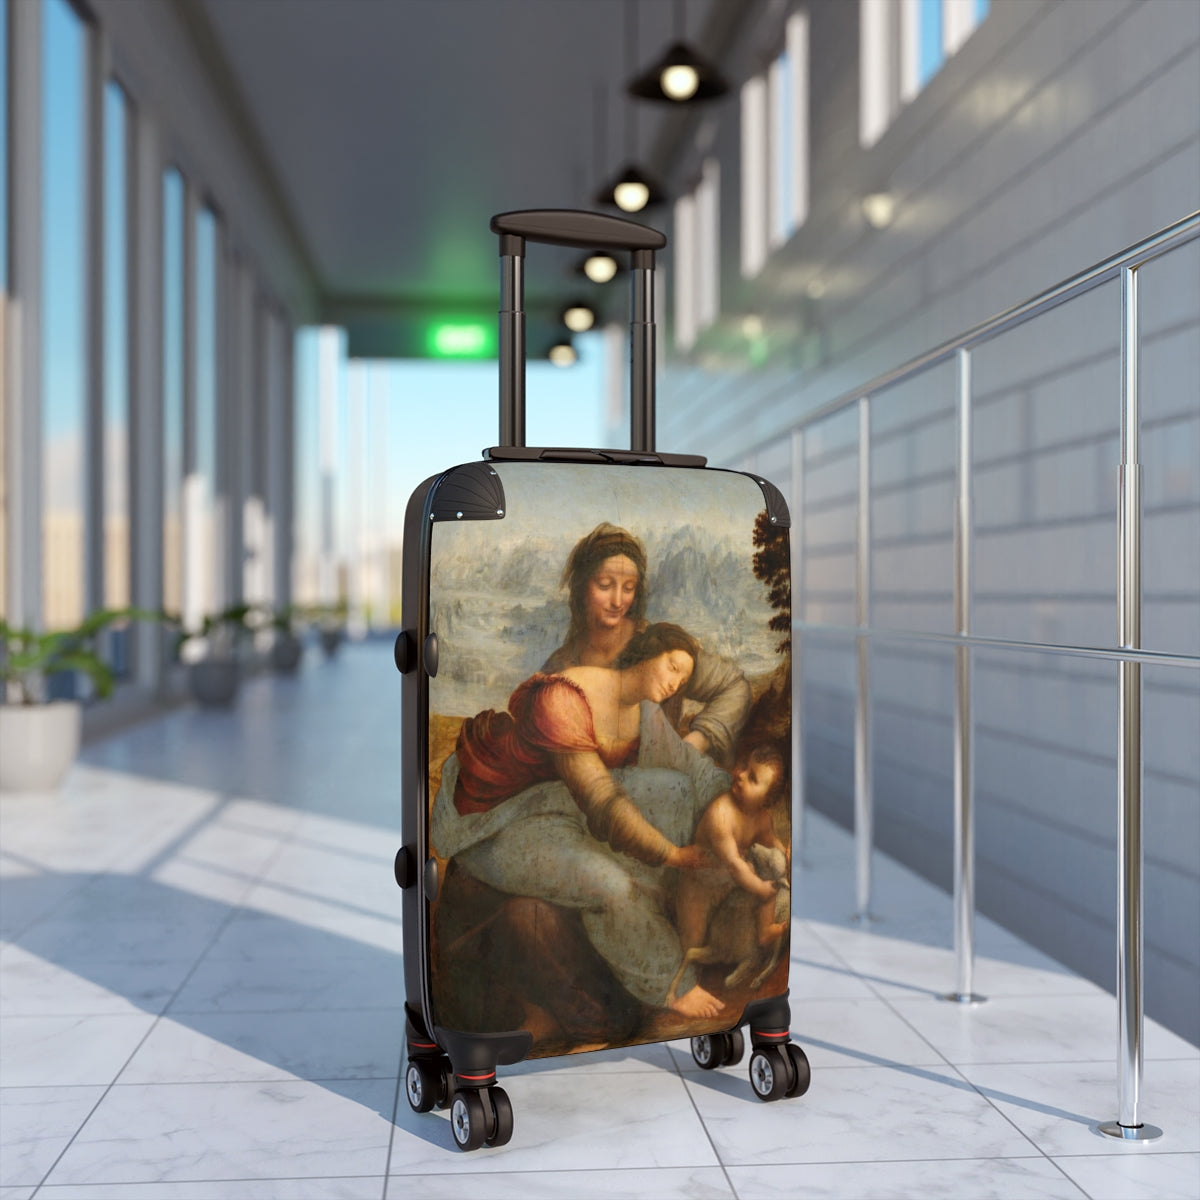 Getrott The Virgin and Child with Saint Anne by Leonardo Da Vinci Black Cabin Suitcase Extended Storage Adjustable Telescopic Handle Double wheeled Polycarbonate Hard-shell Built-in Lock-Bags-Geotrott